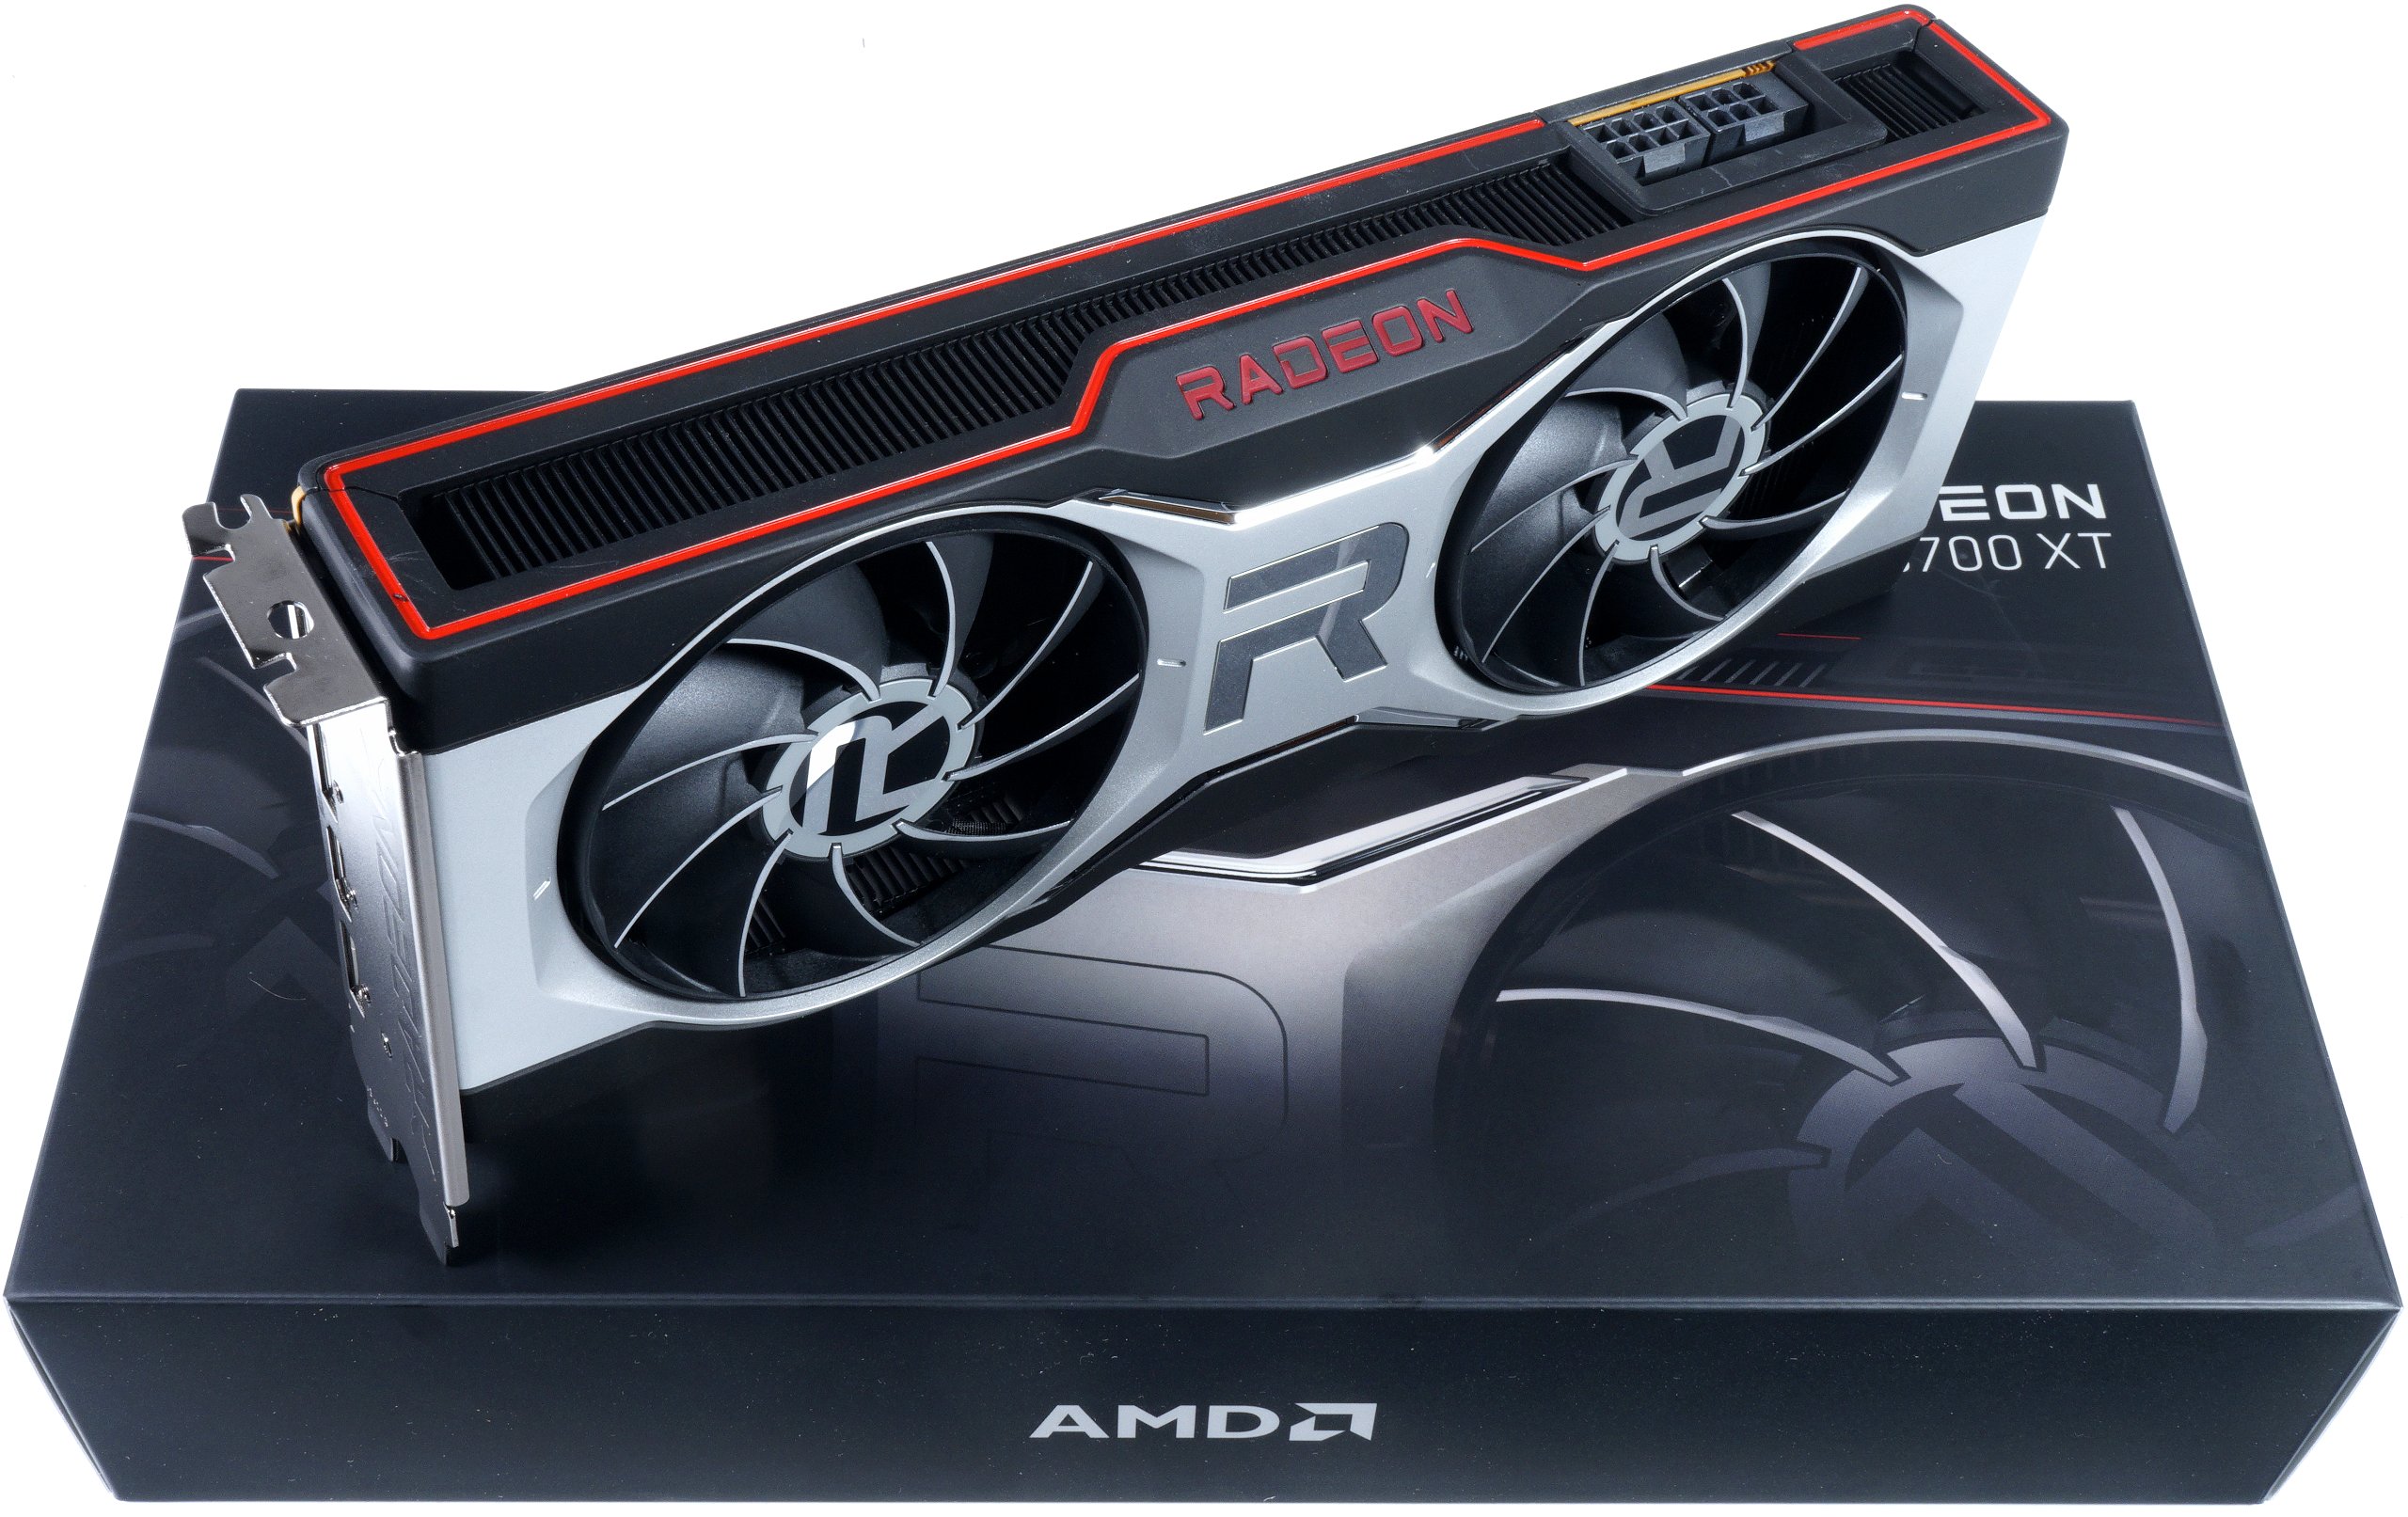 AMD Radeon RX 6700 XT Reviews, Pros and Cons